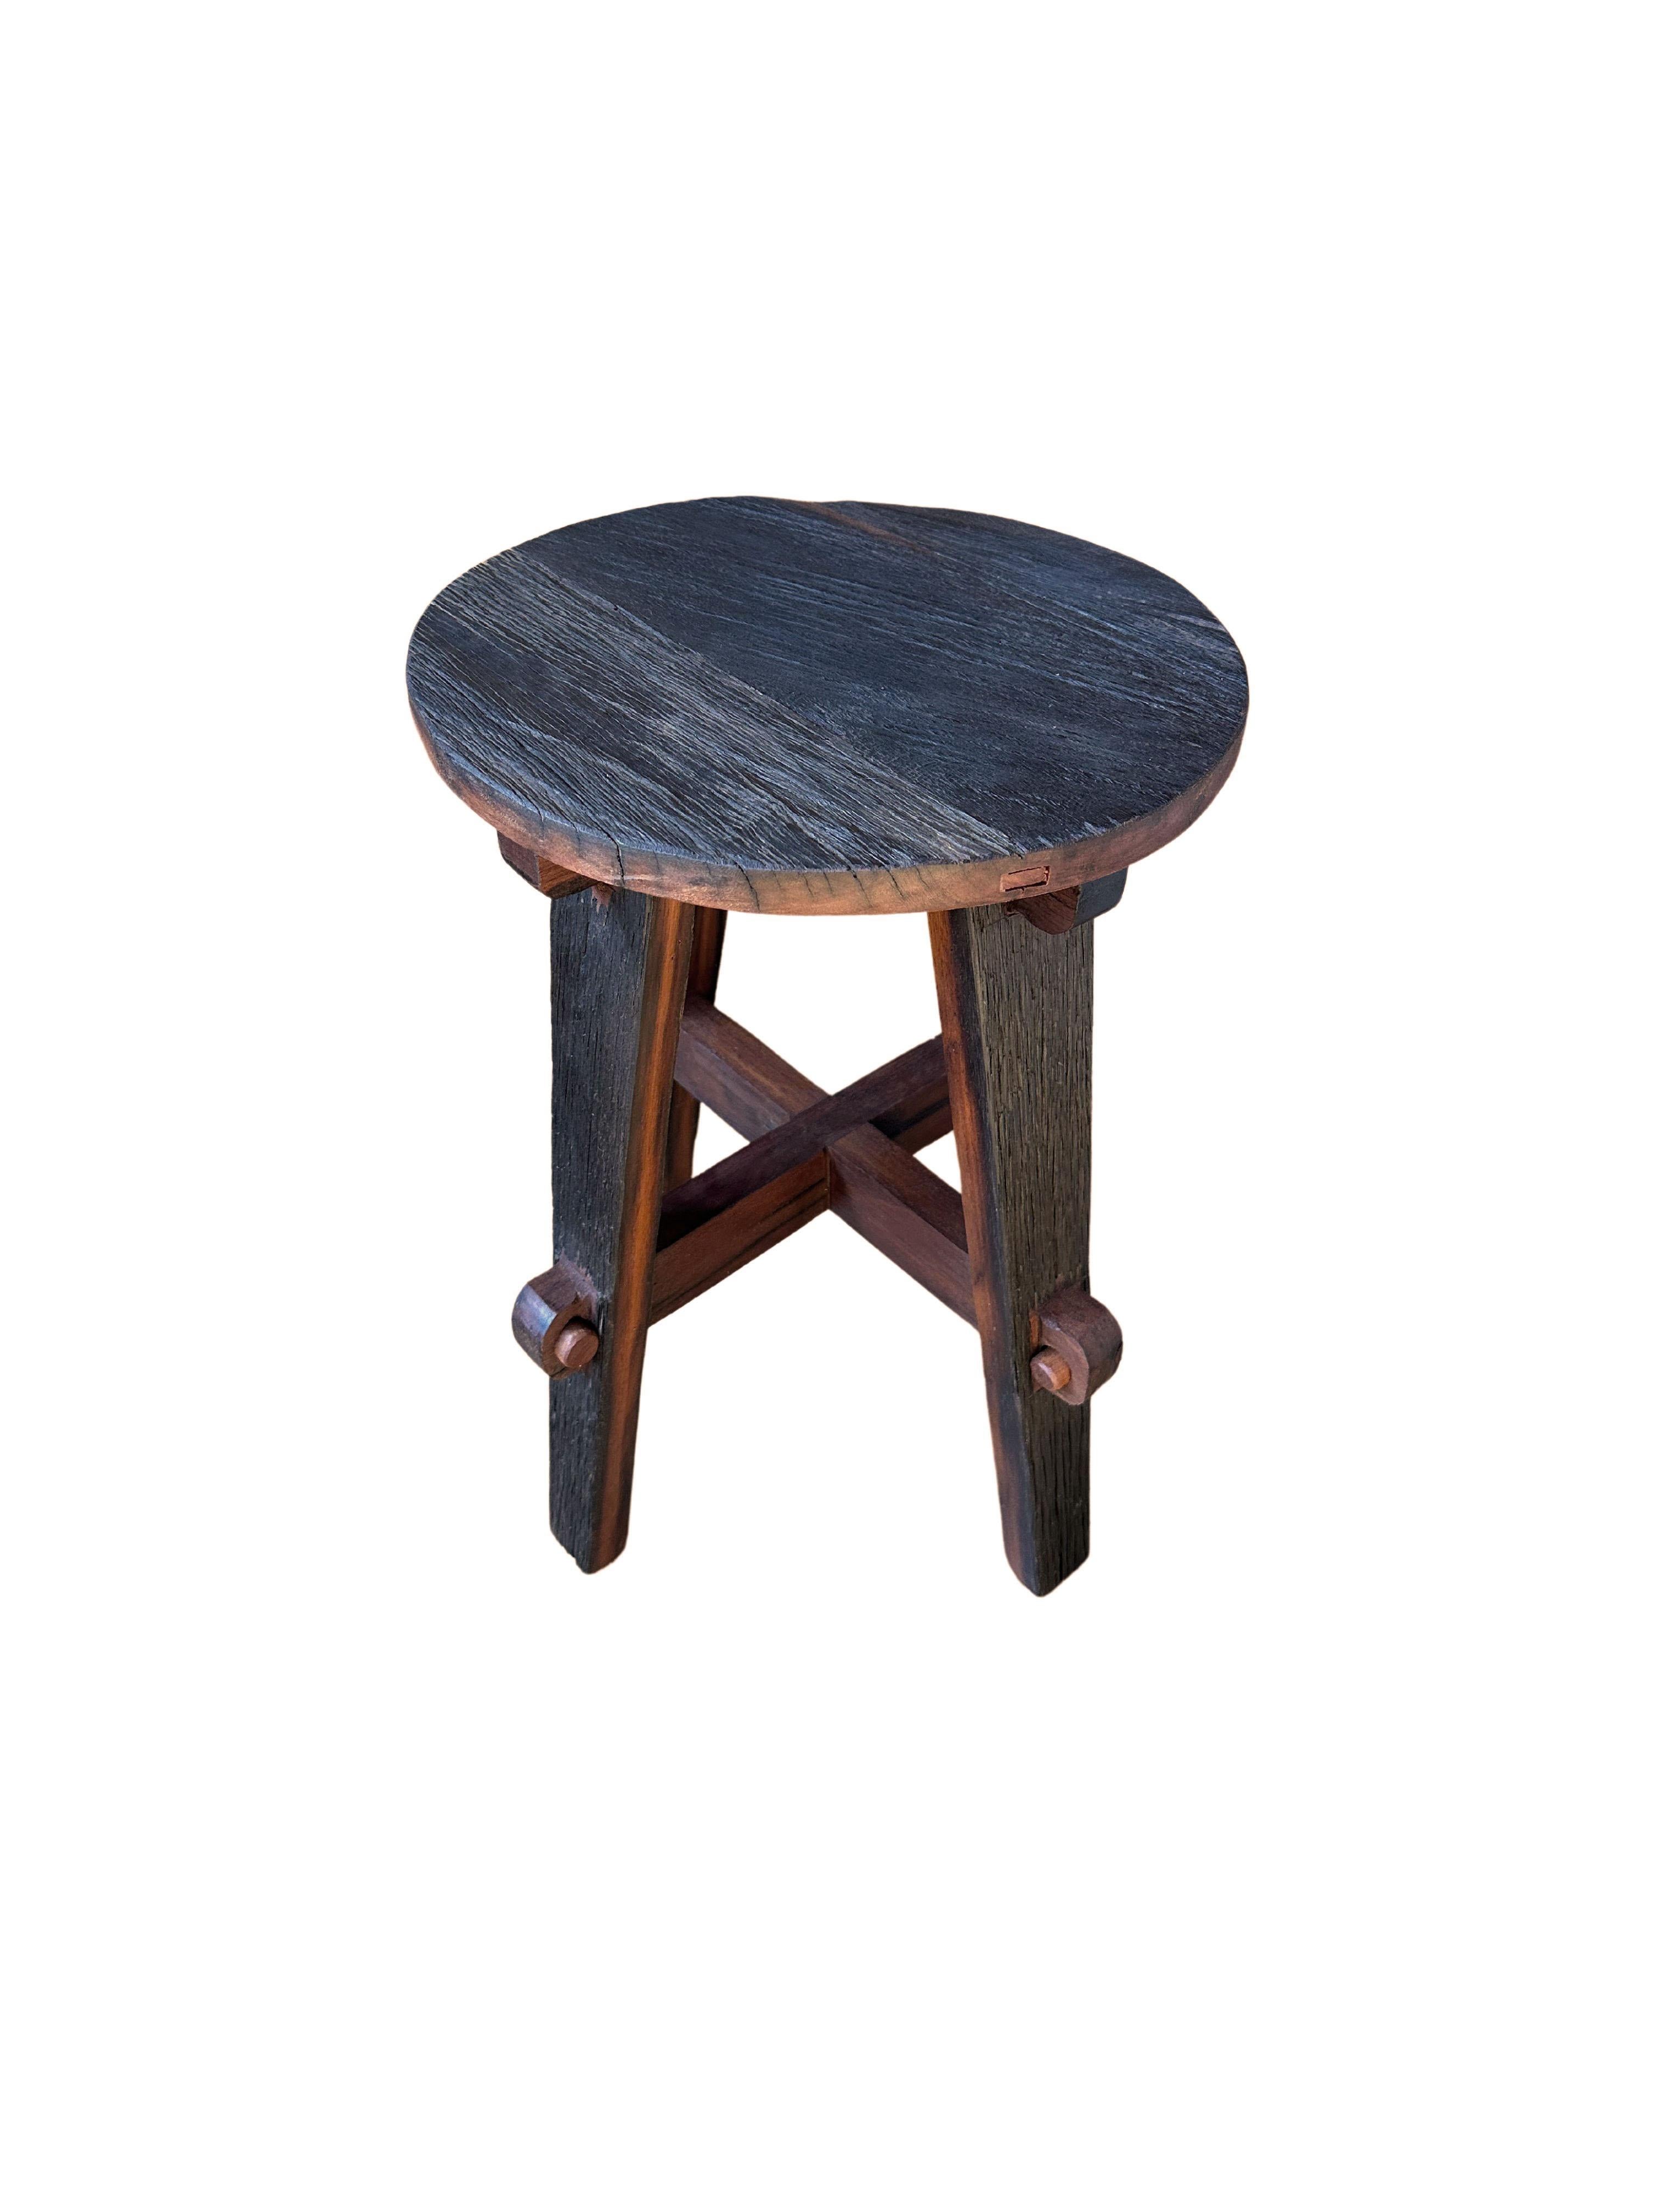 Hand-Crafted Ironwood Stool Modern Organic, Hand Crafted with Artisanal Wood Joinery For Sale